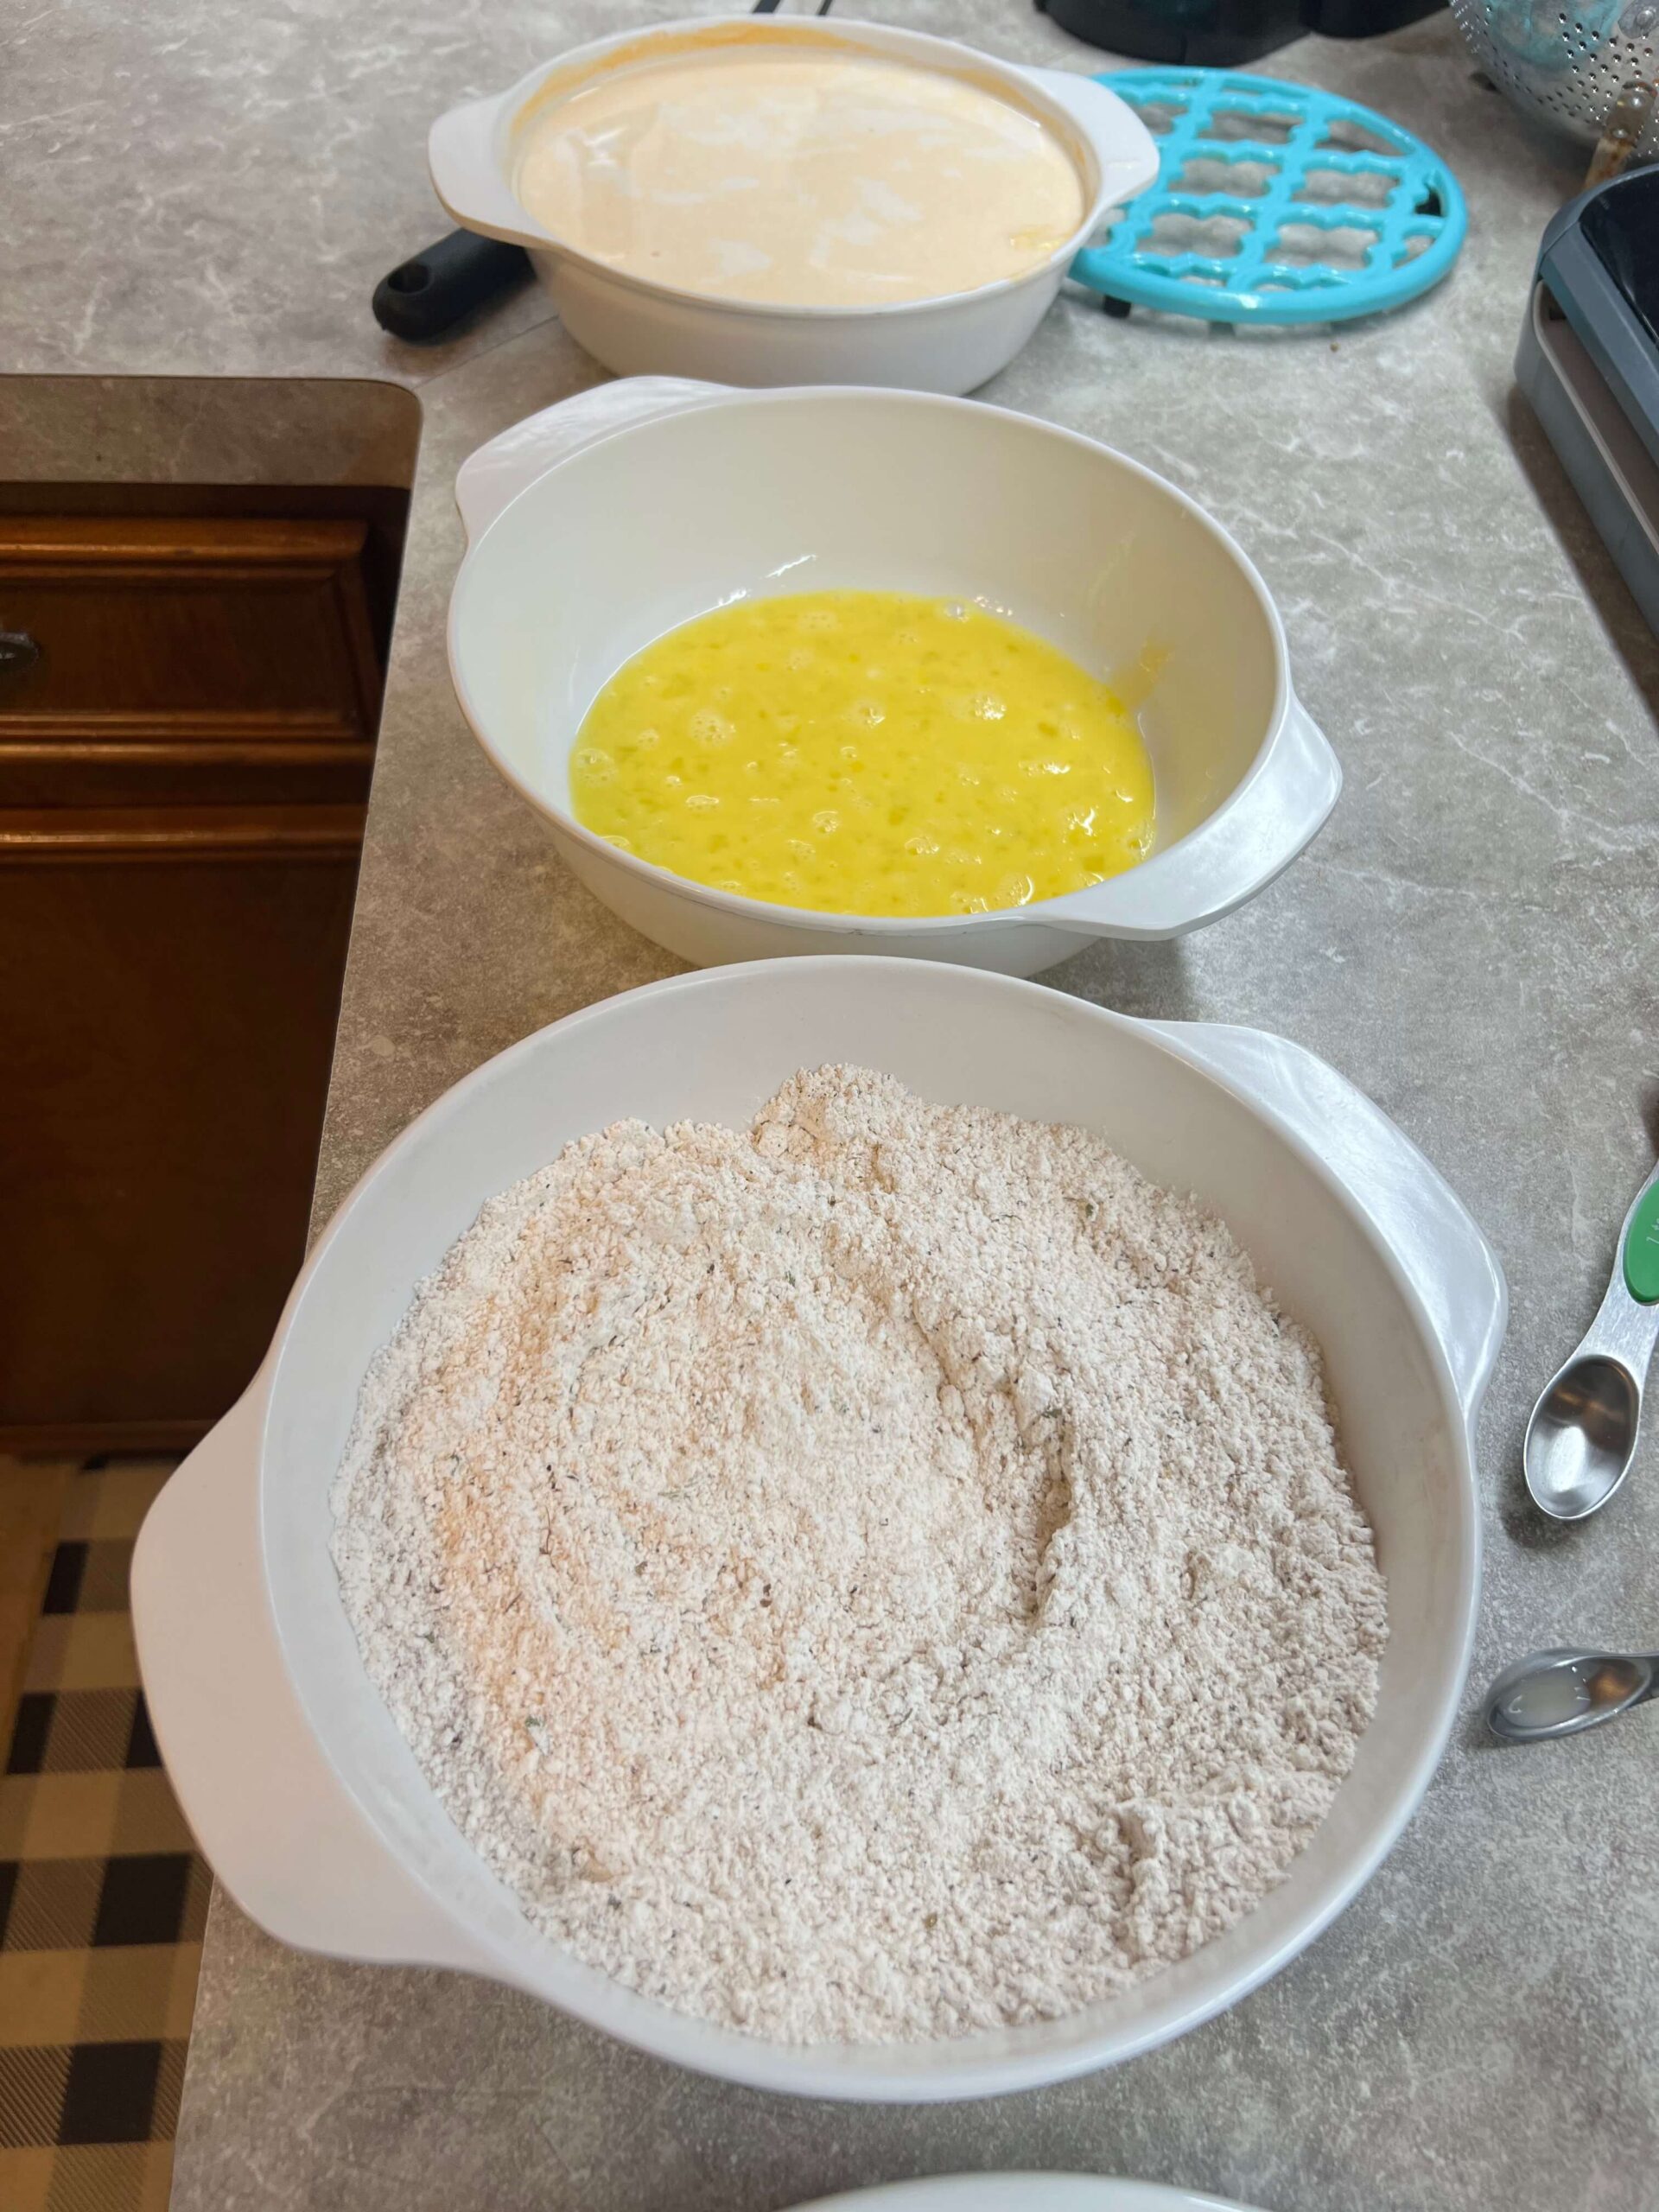 Ready to batter your chicken; buttermilk, flour mixture, egg, and then mixture again.